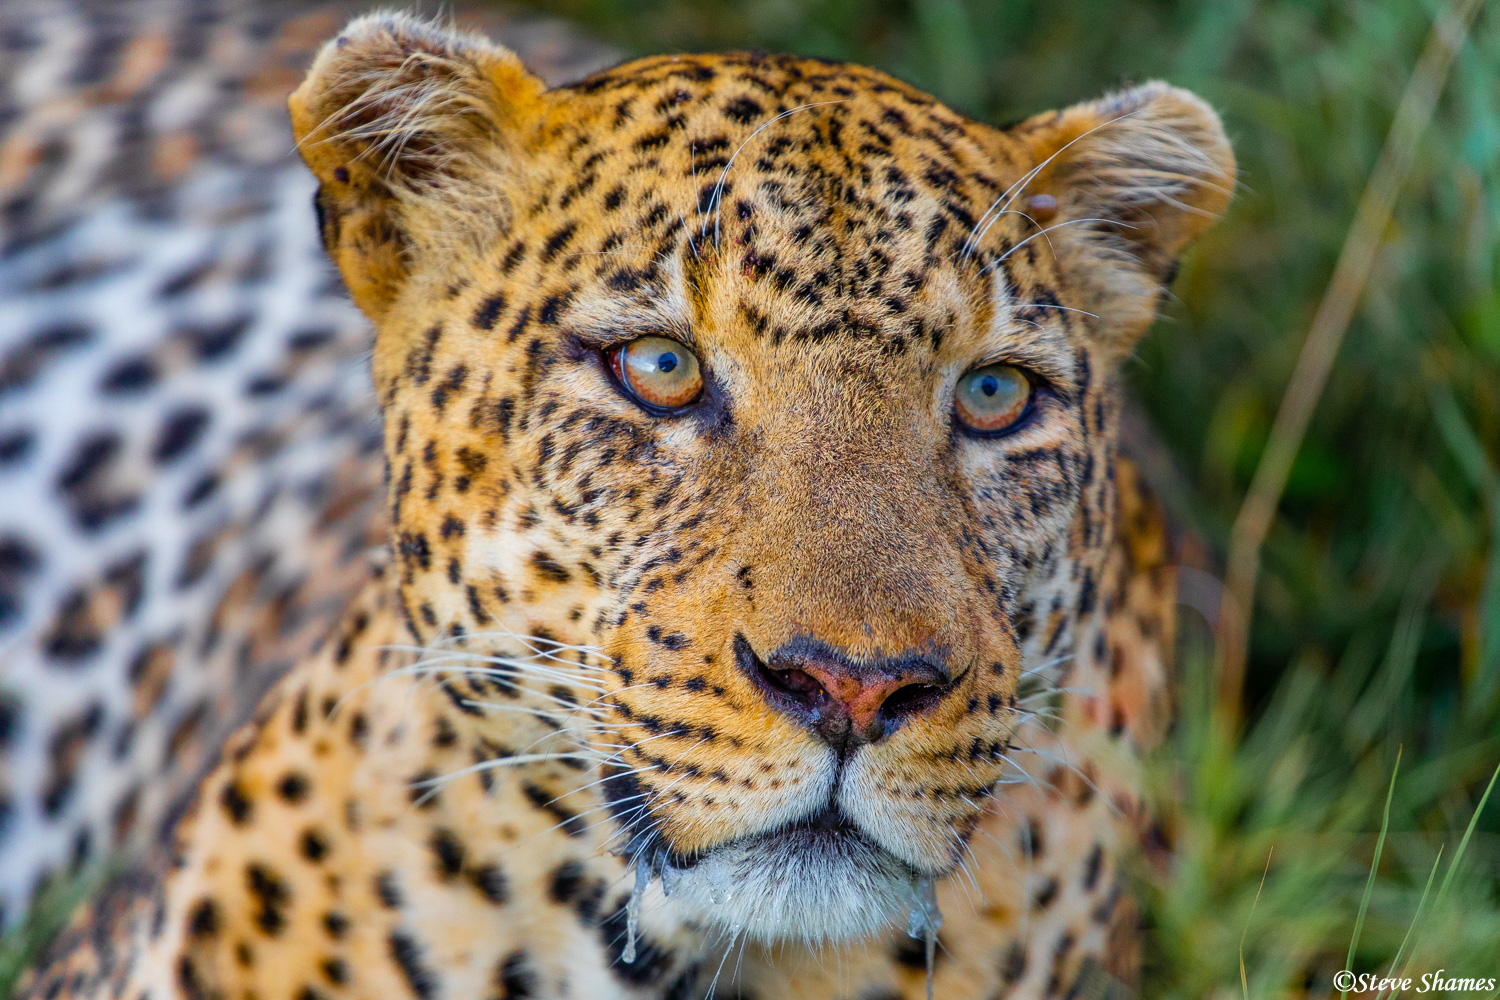 Close up of a leopard face. He seems to be drooling.